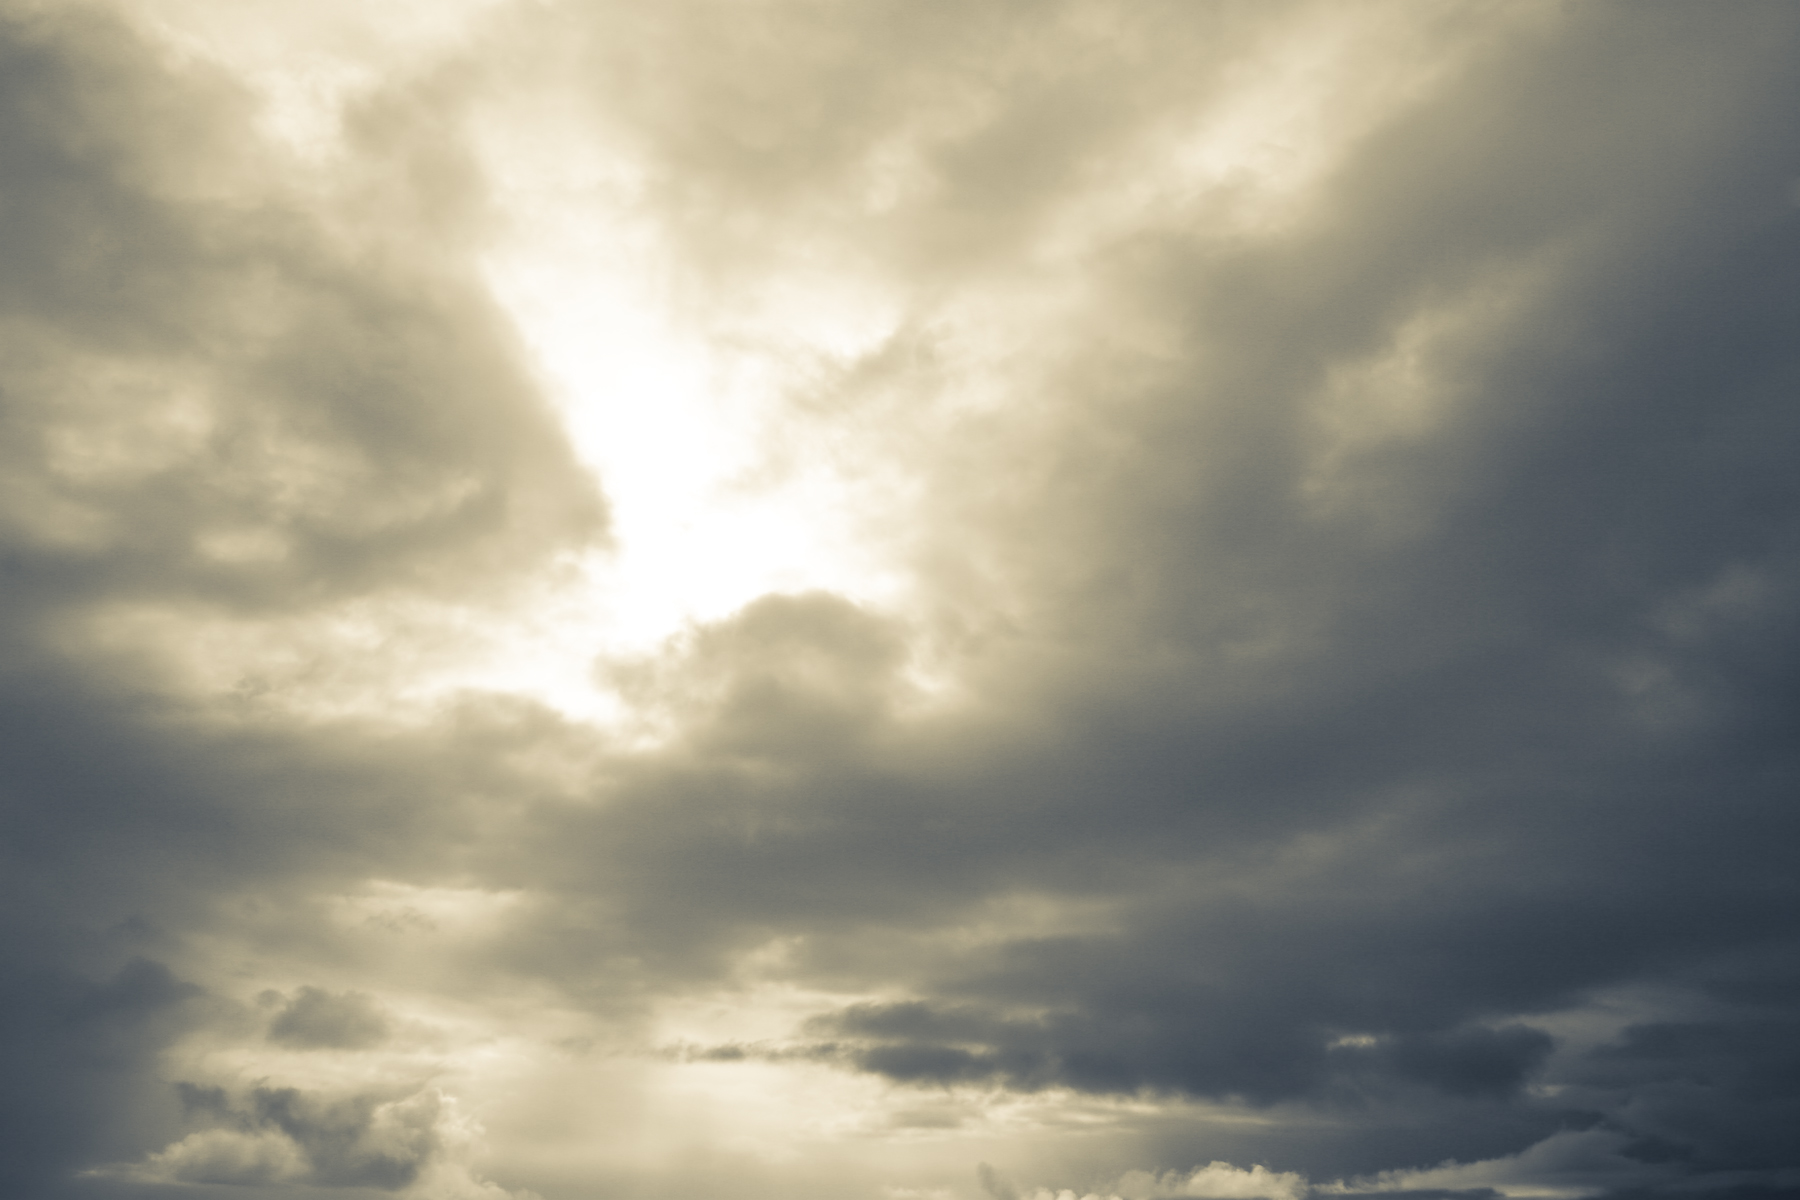 Thick clouds, Abstract, Clouds, Cloudy, Dreamy, HQ Photo